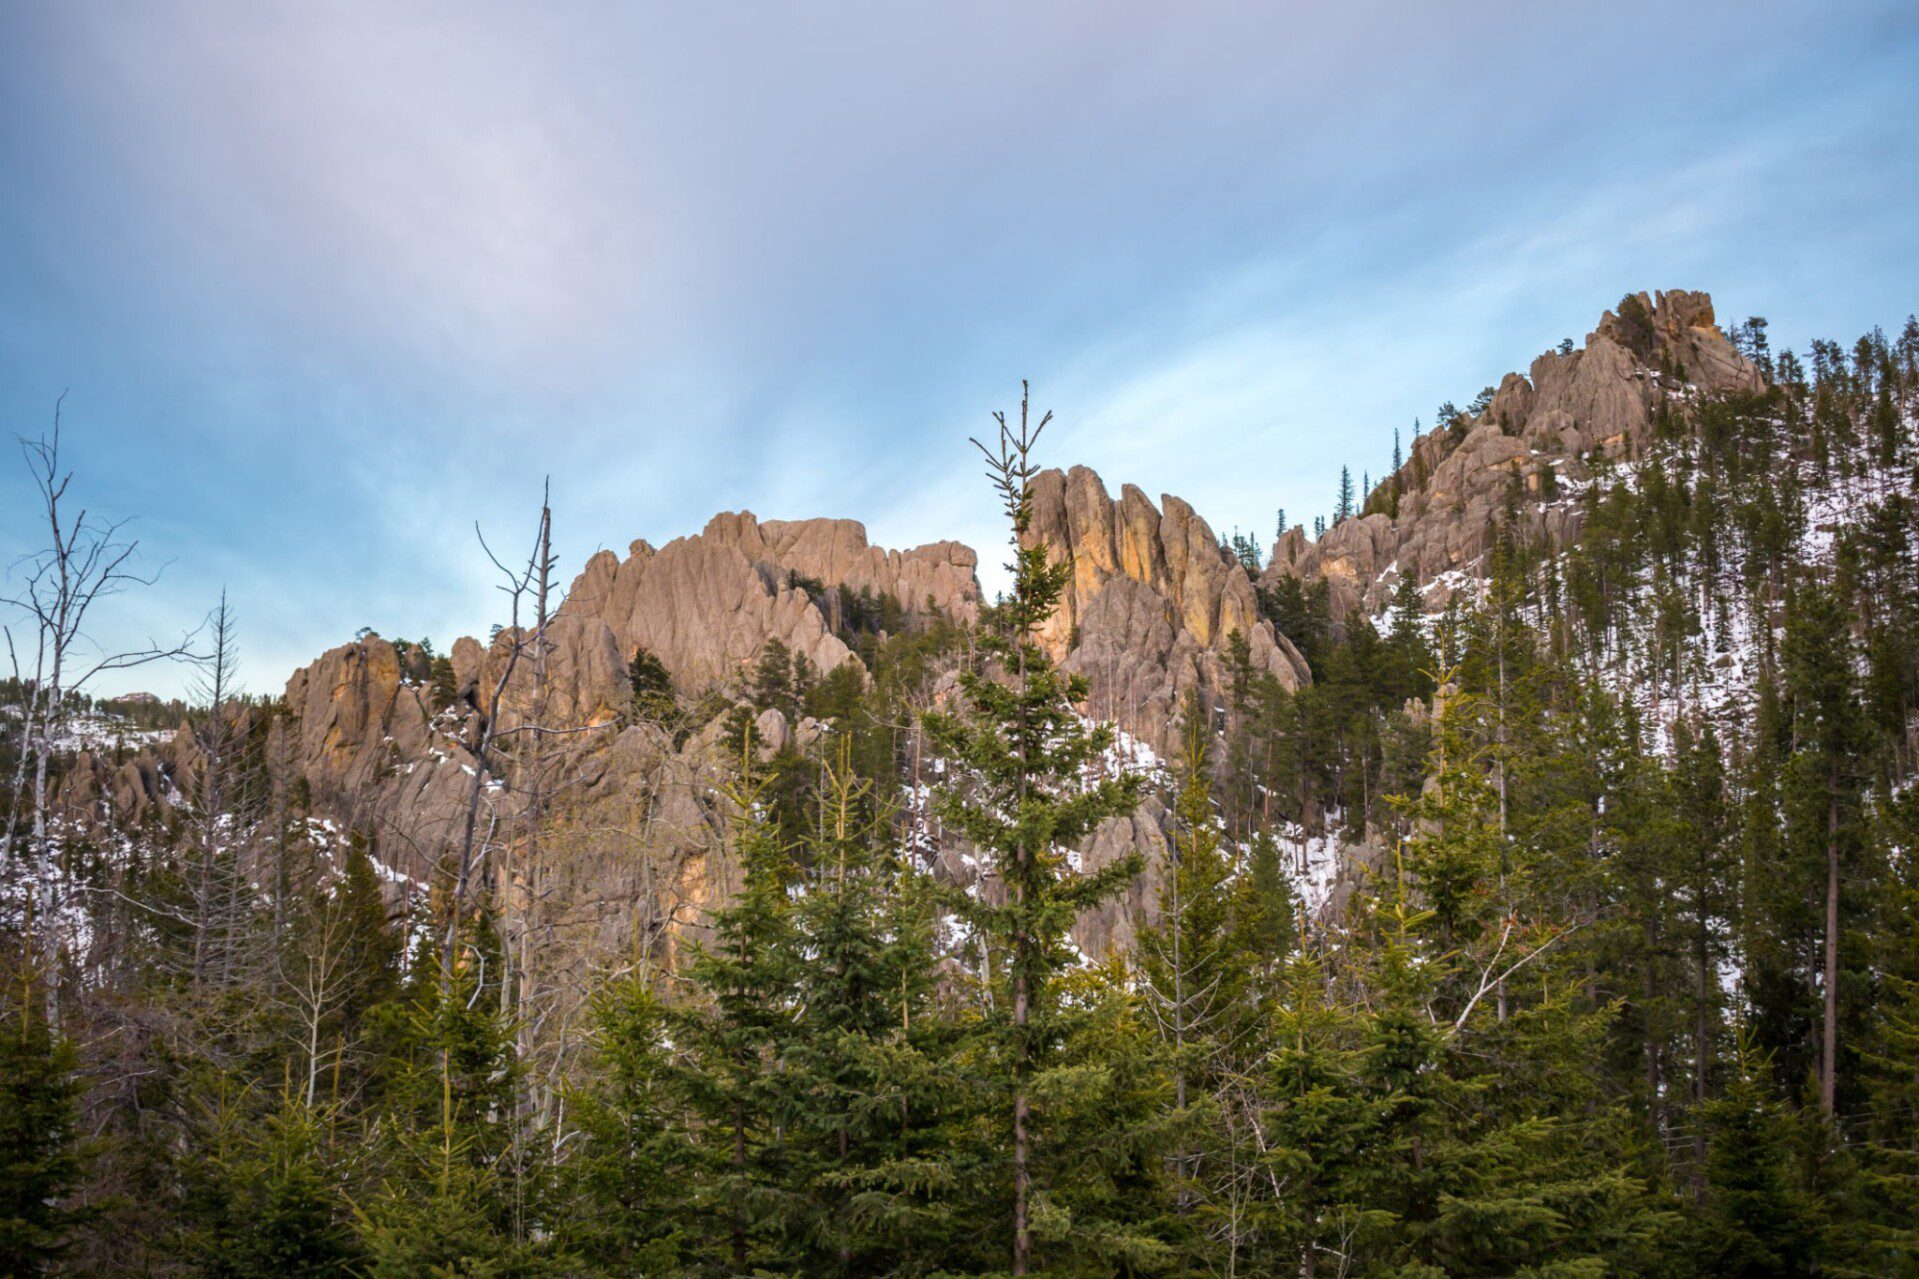 Epic mountain landscape scenery from the preserve forest of the park